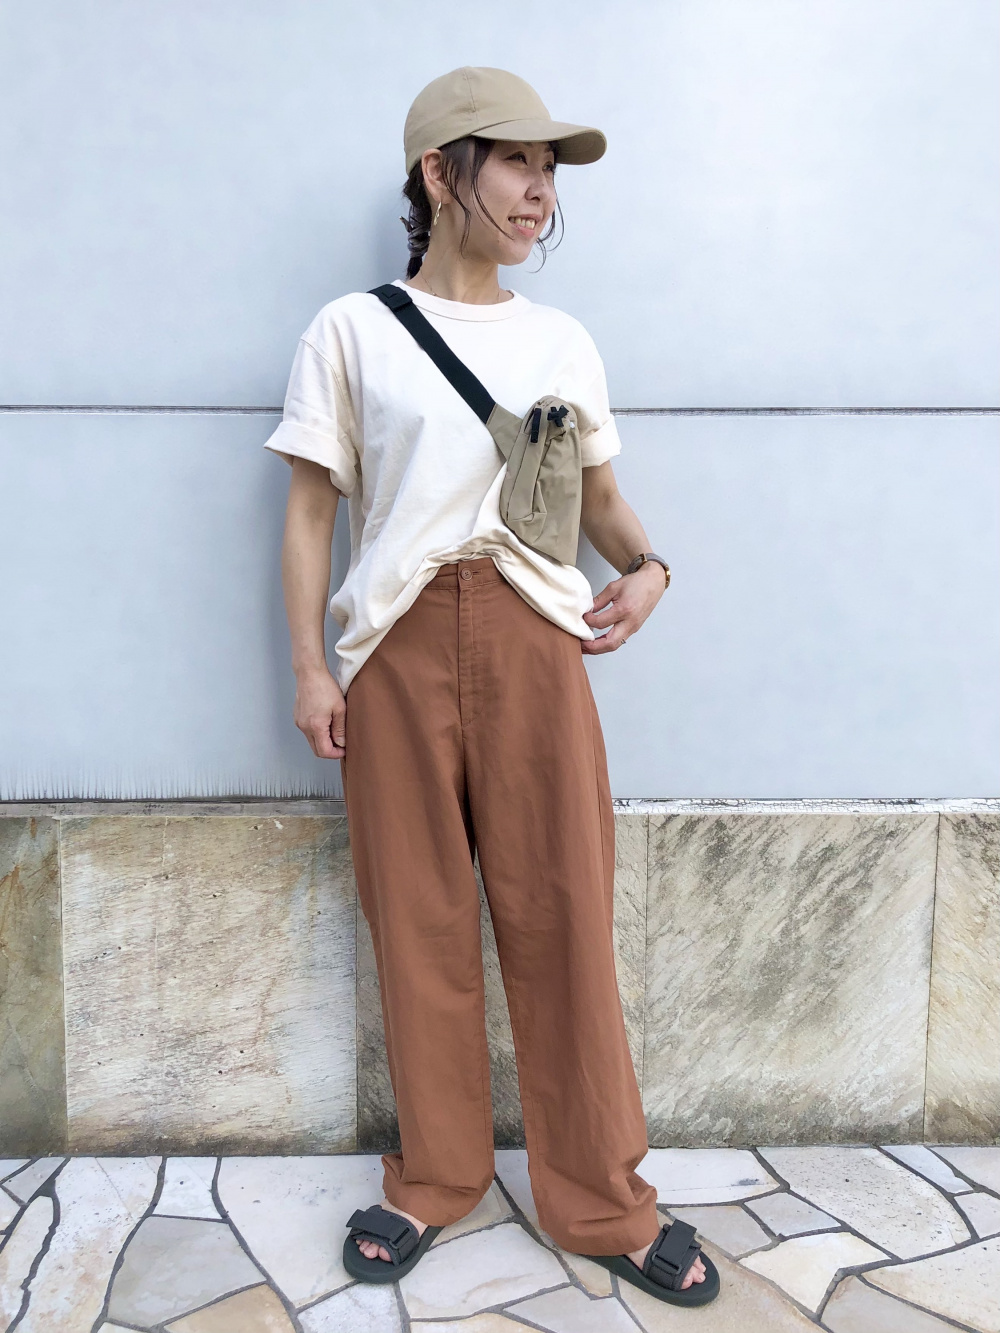 Check styling ideas for「AIRism Seamless Boat Neck Short-Sleeve